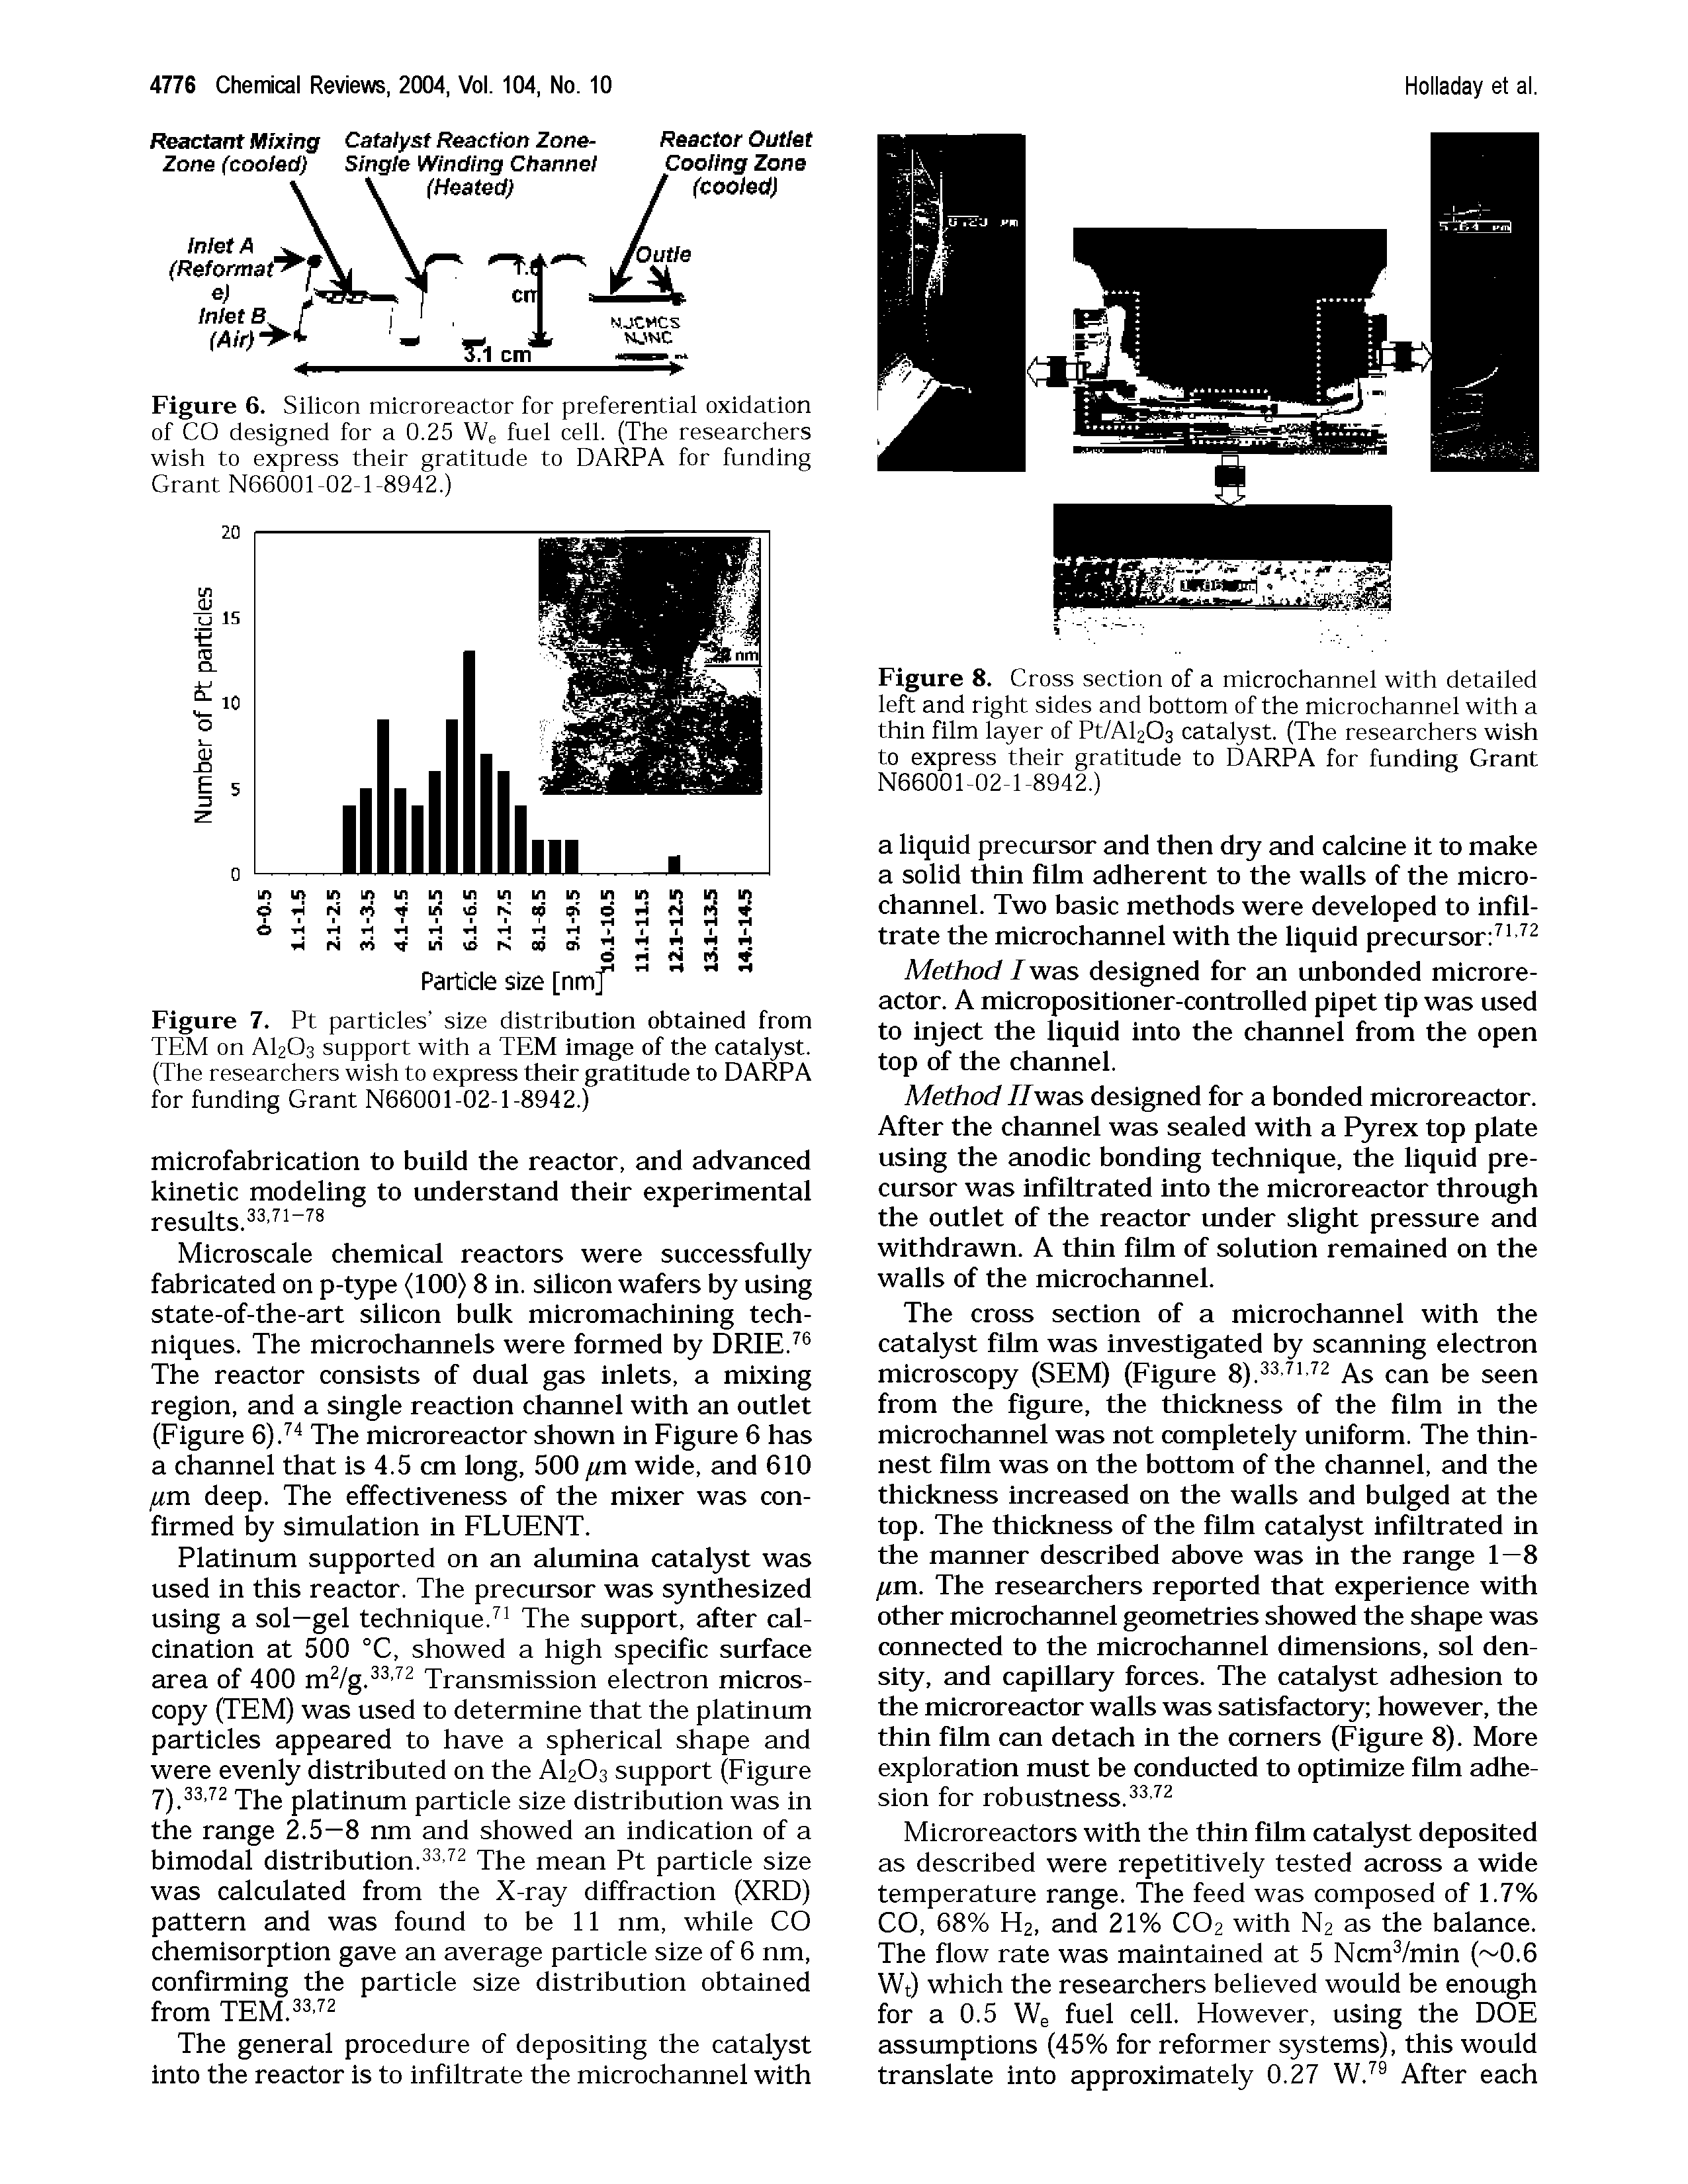 Figure 7. Pt particles size distribution obtained from TEM on AI2O3 support with a TEM image of the catalyst. (The researchers wish to express their gratitude to DARPA for funding Grant N66001-02-1-8942.)...